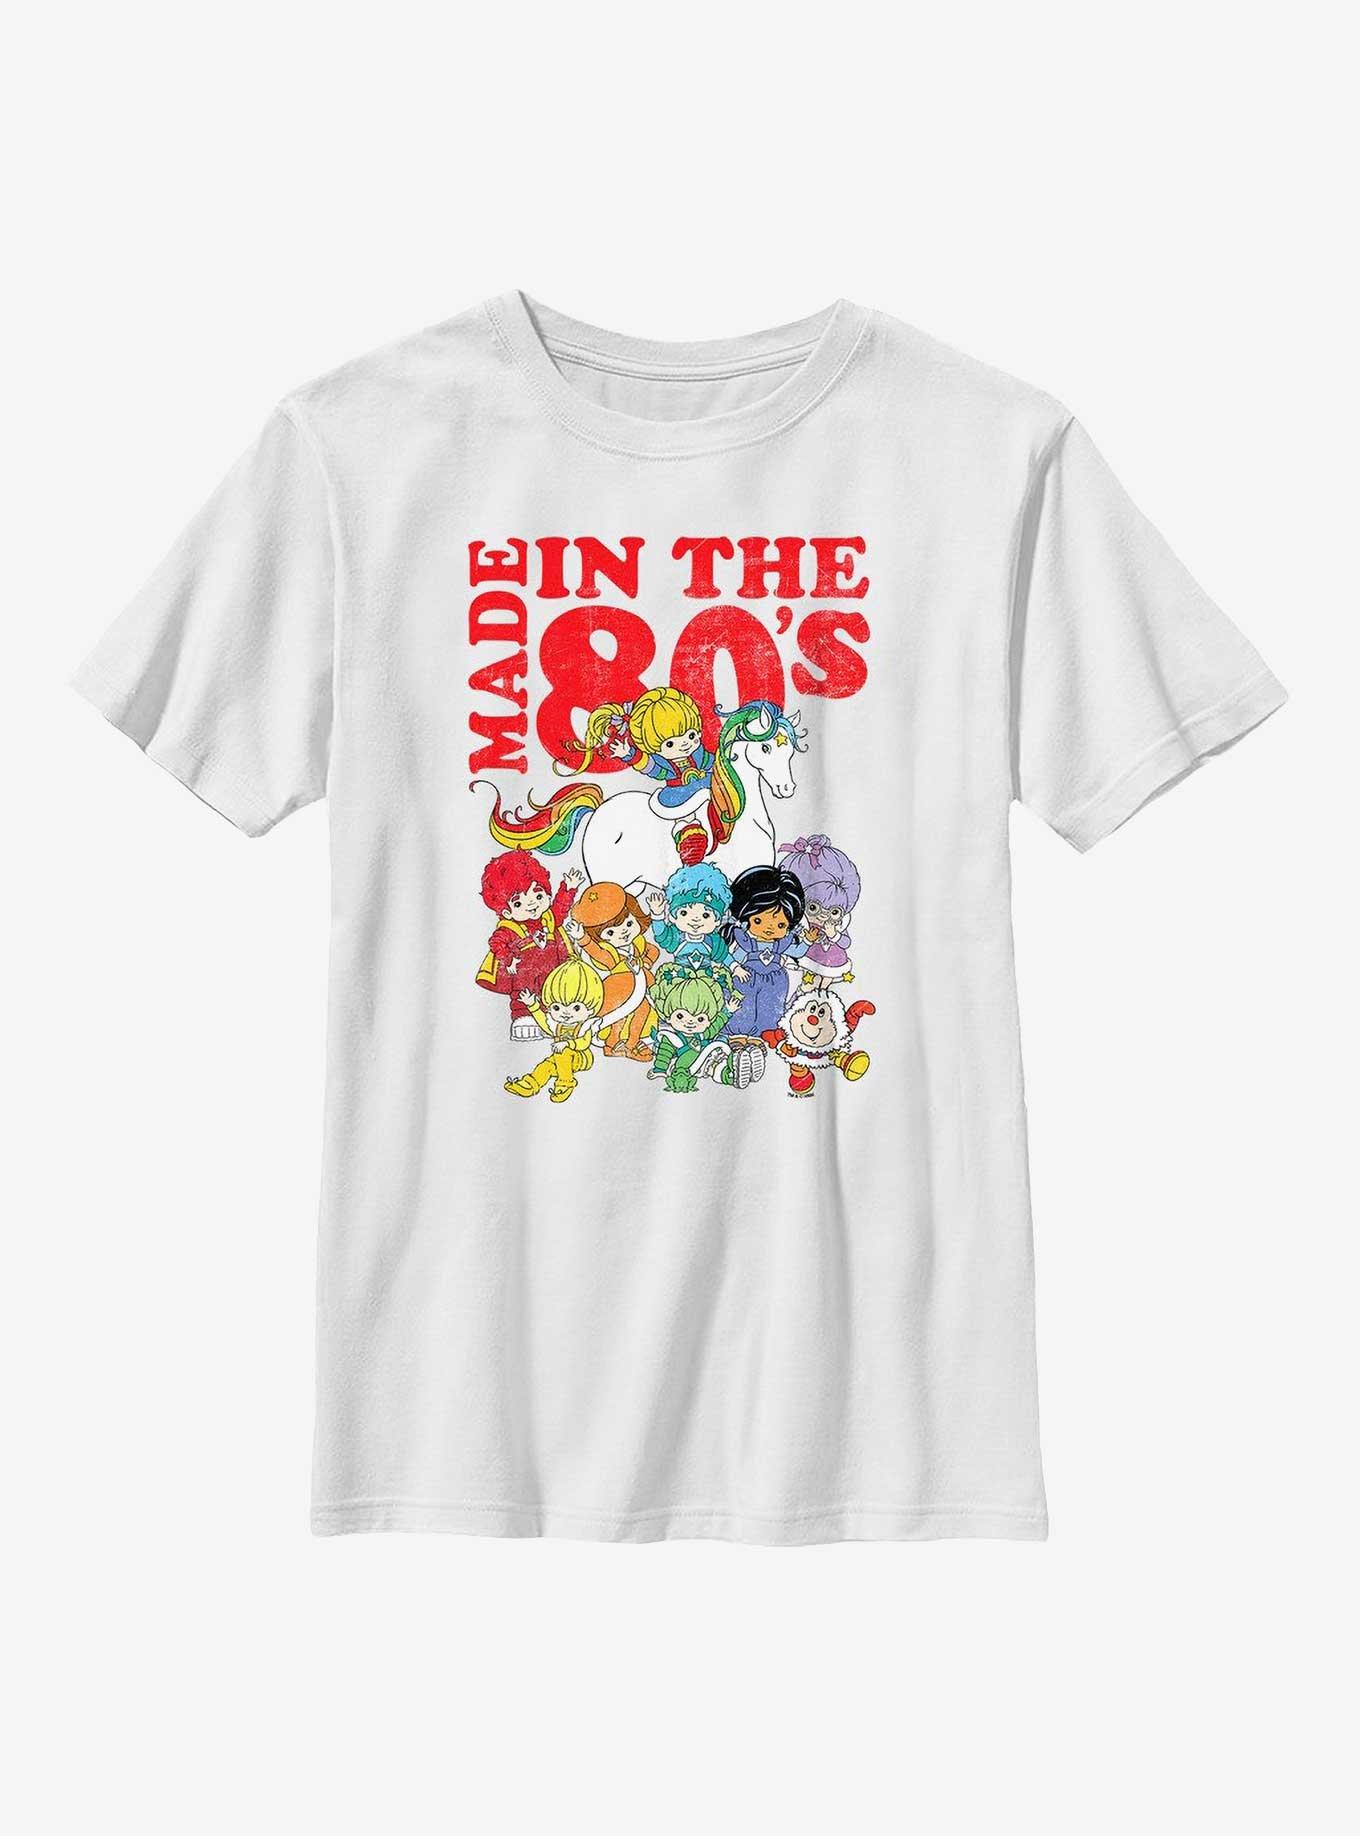 Rainbow Brite Made In The 80's Youth T-Shirt, WHITE, hi-res